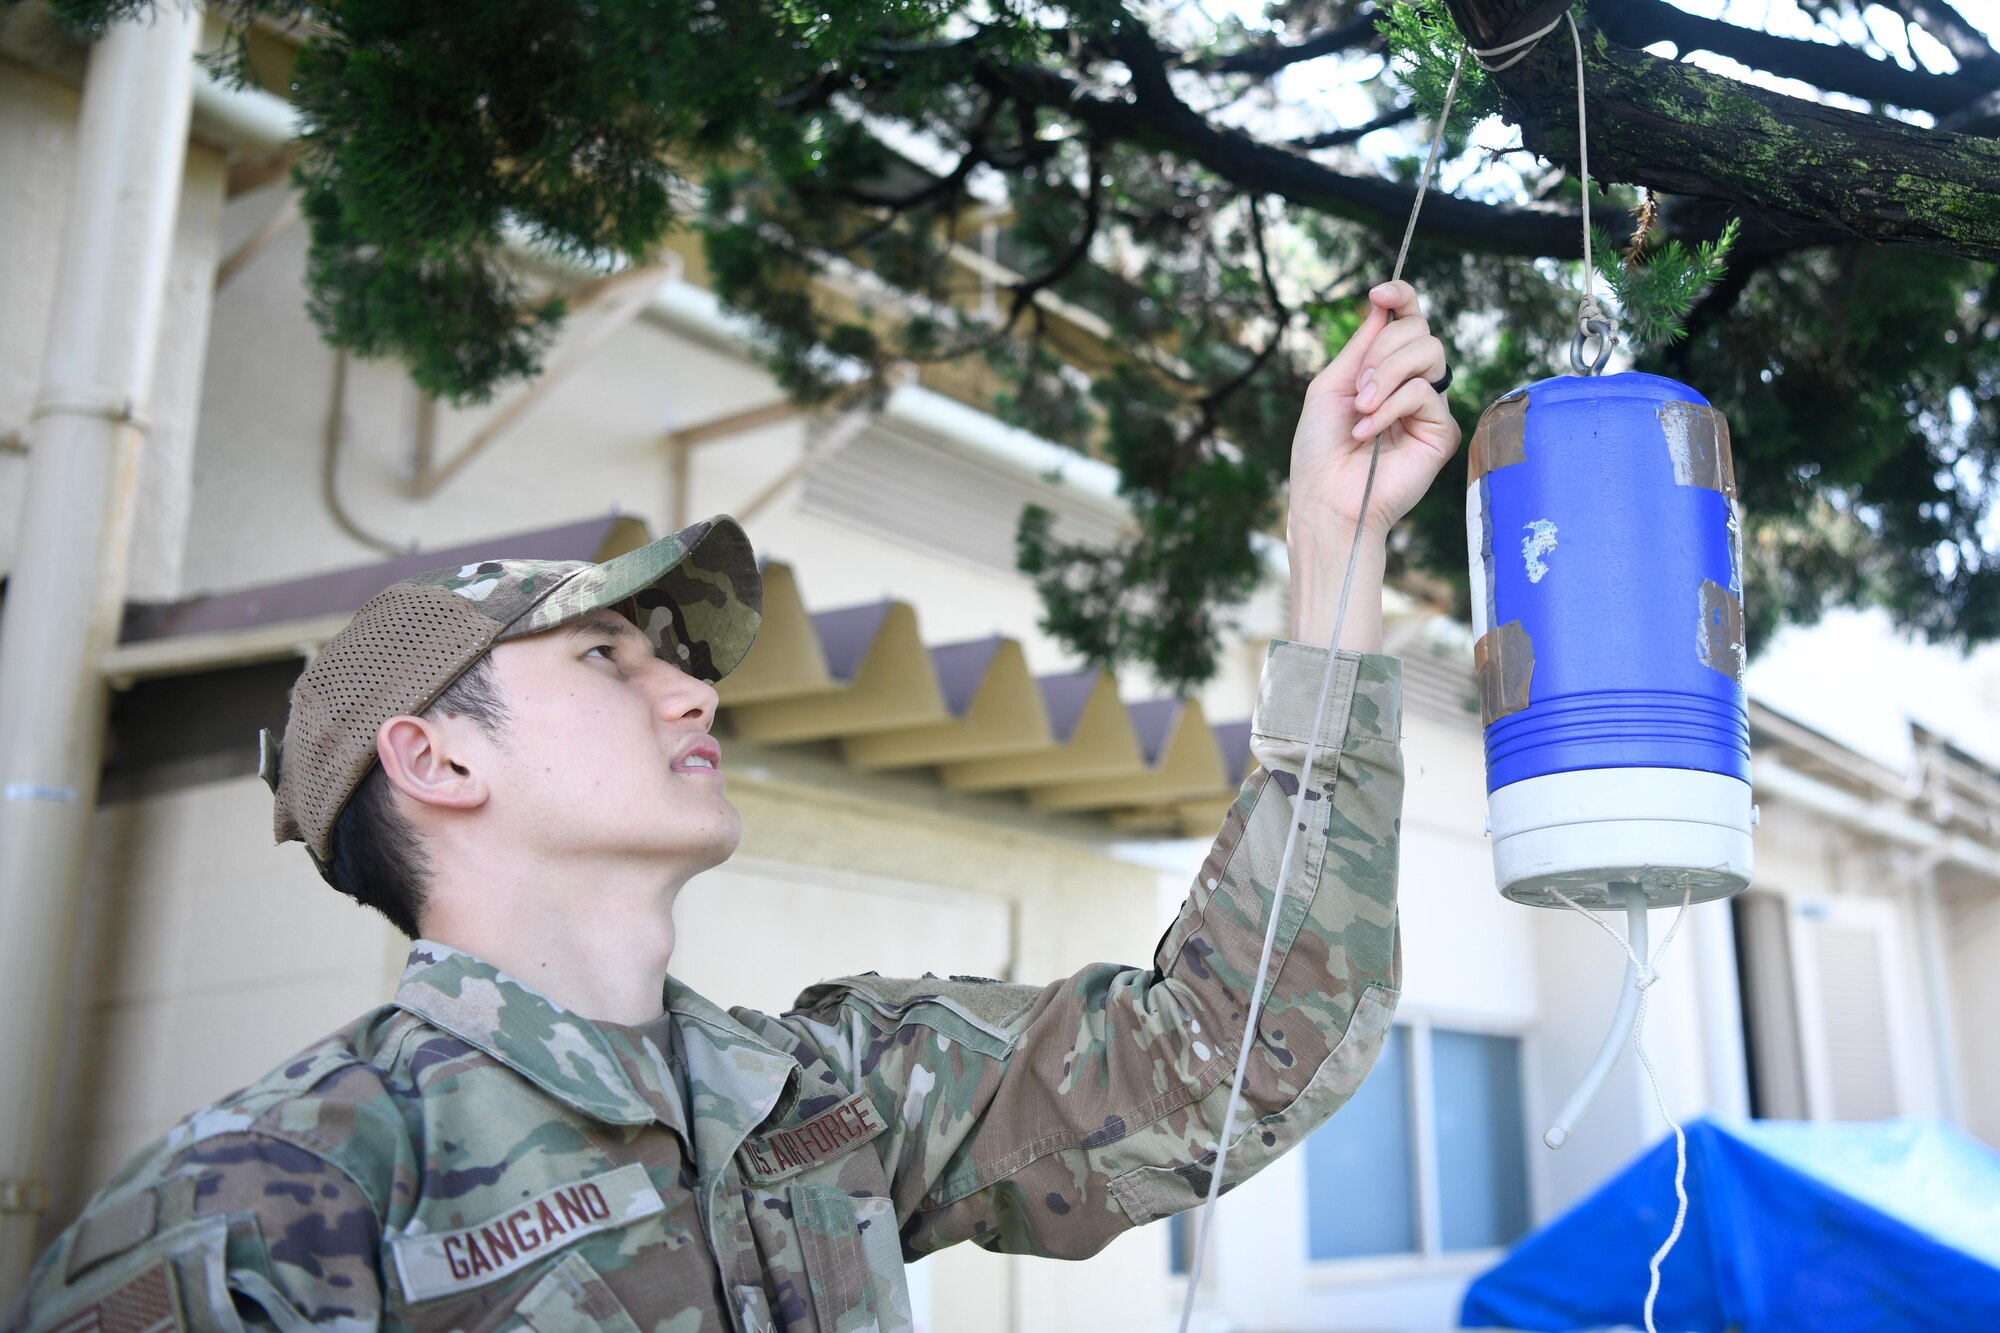 A service member sets up an insect trap.